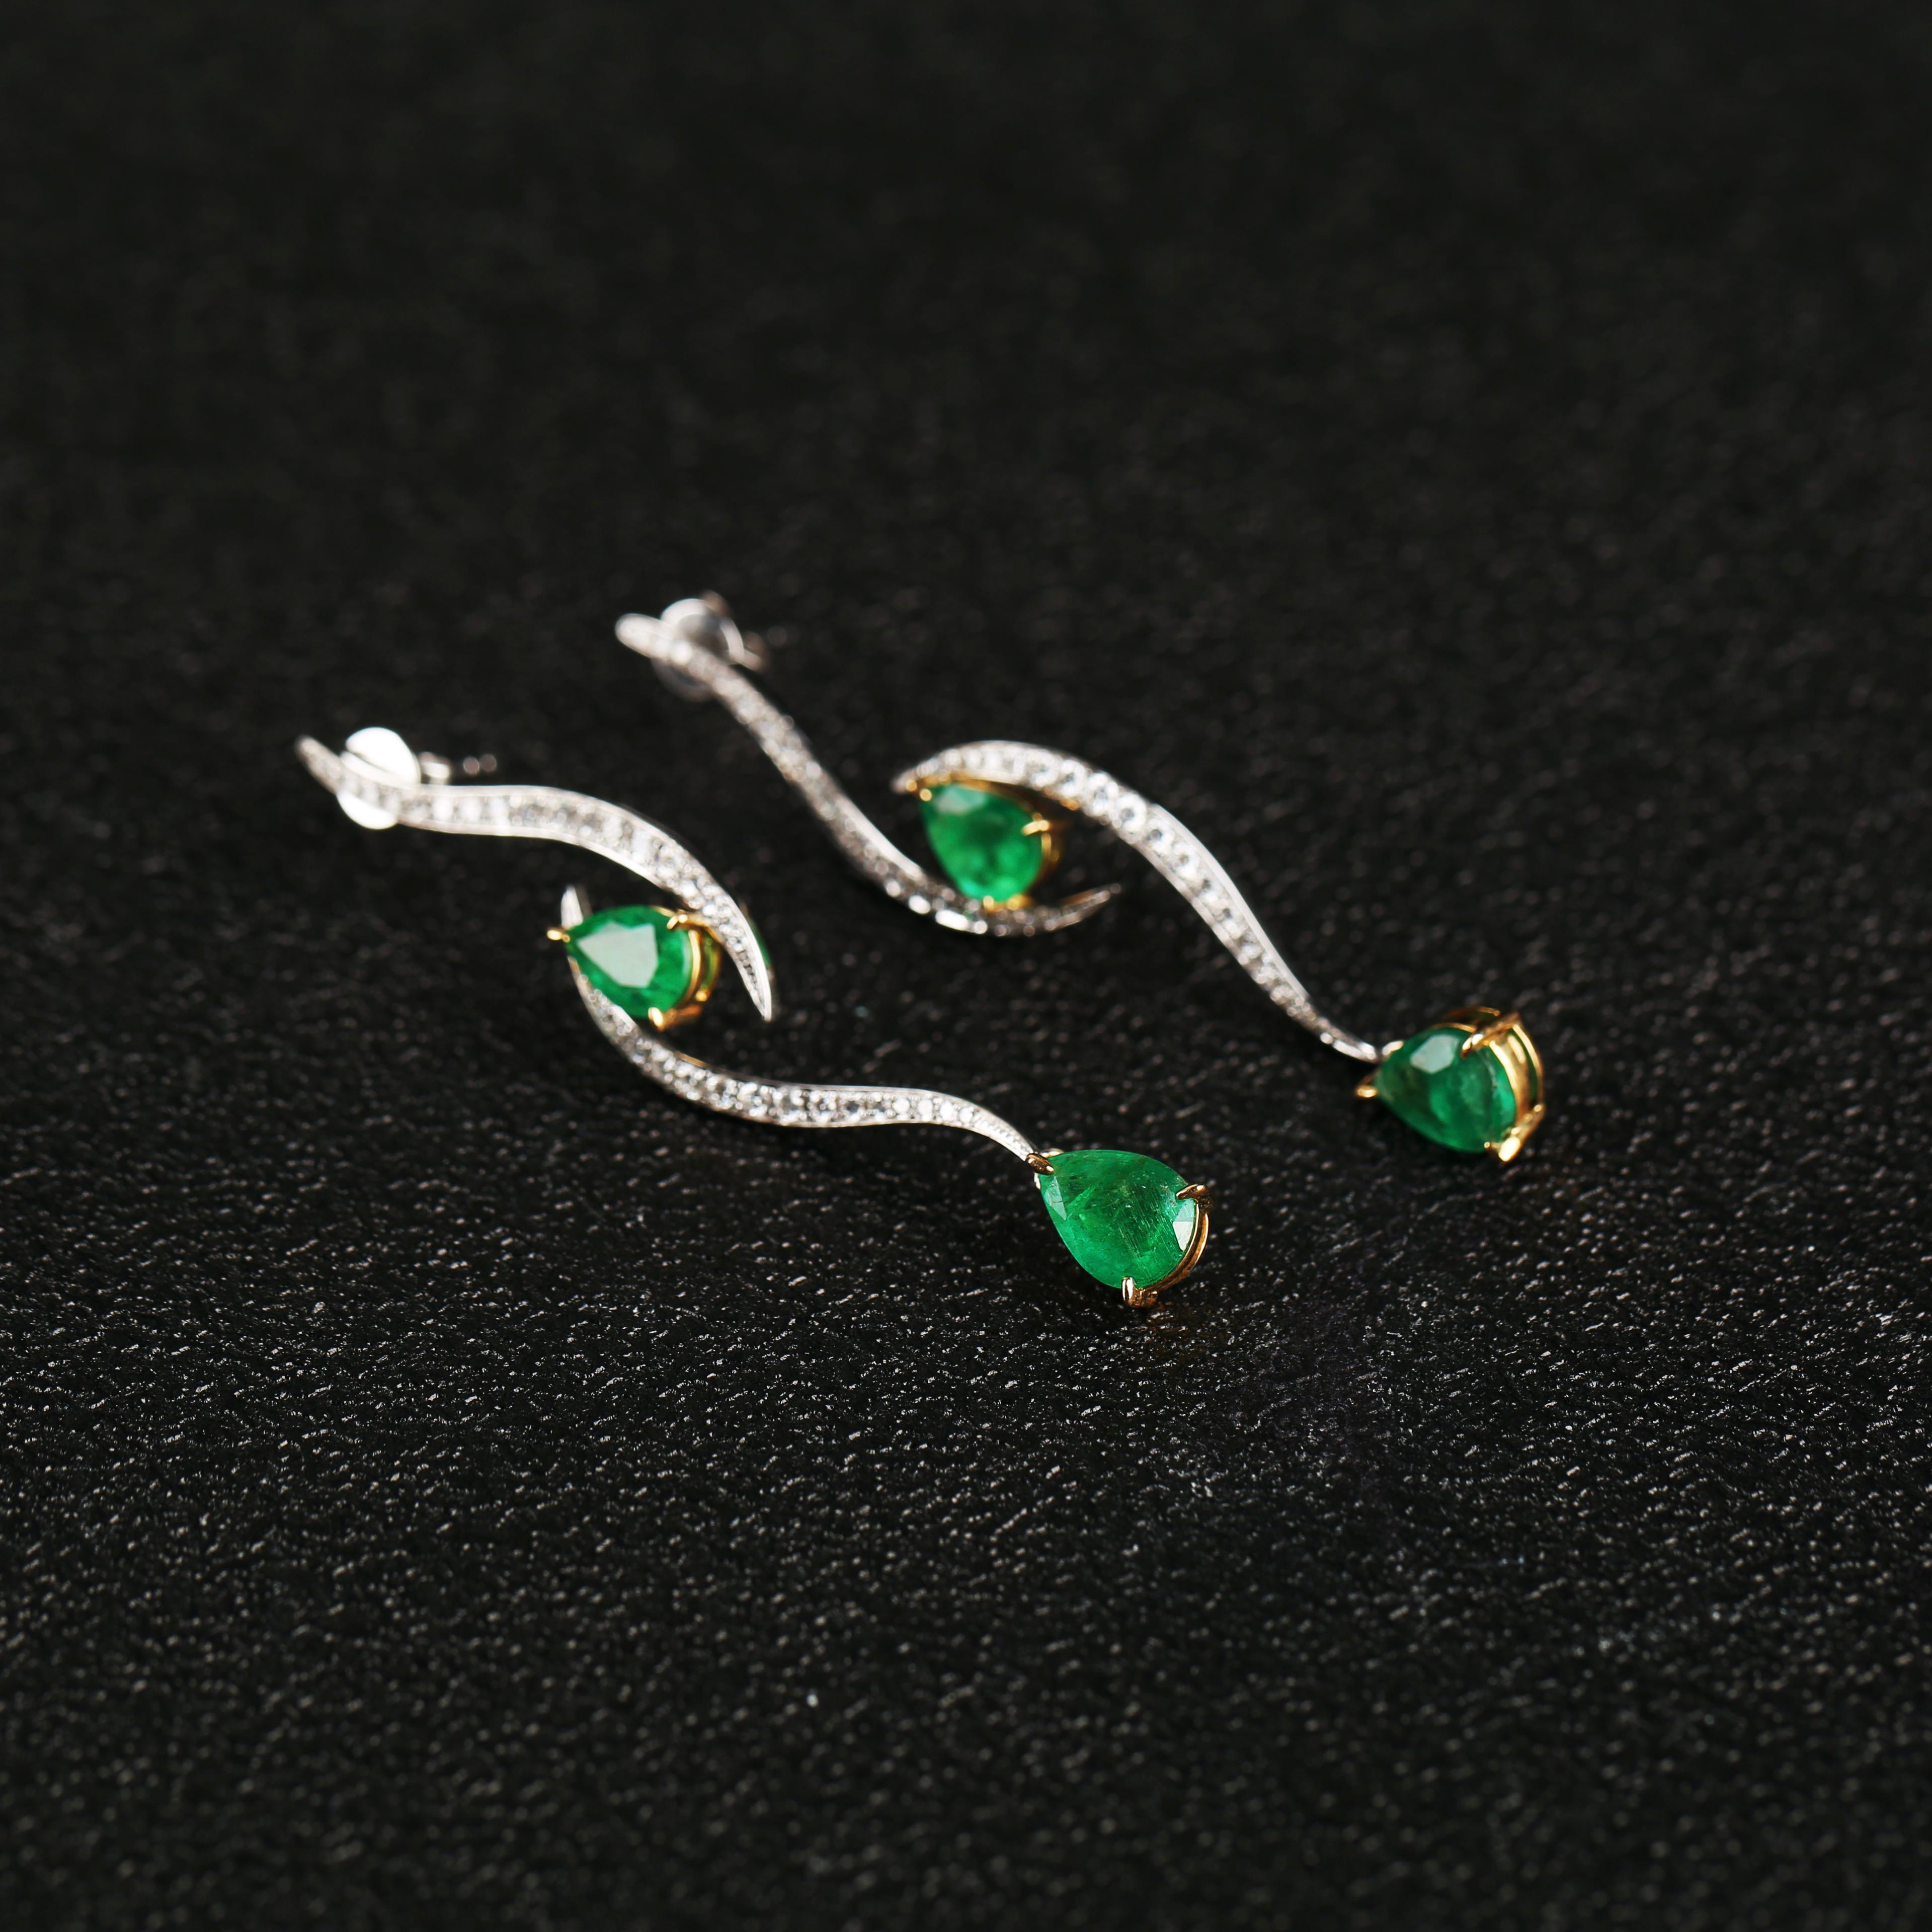 Contemporary 3.1 Ct Emerald and Diamond Earring in 18k Yellow and White Gold